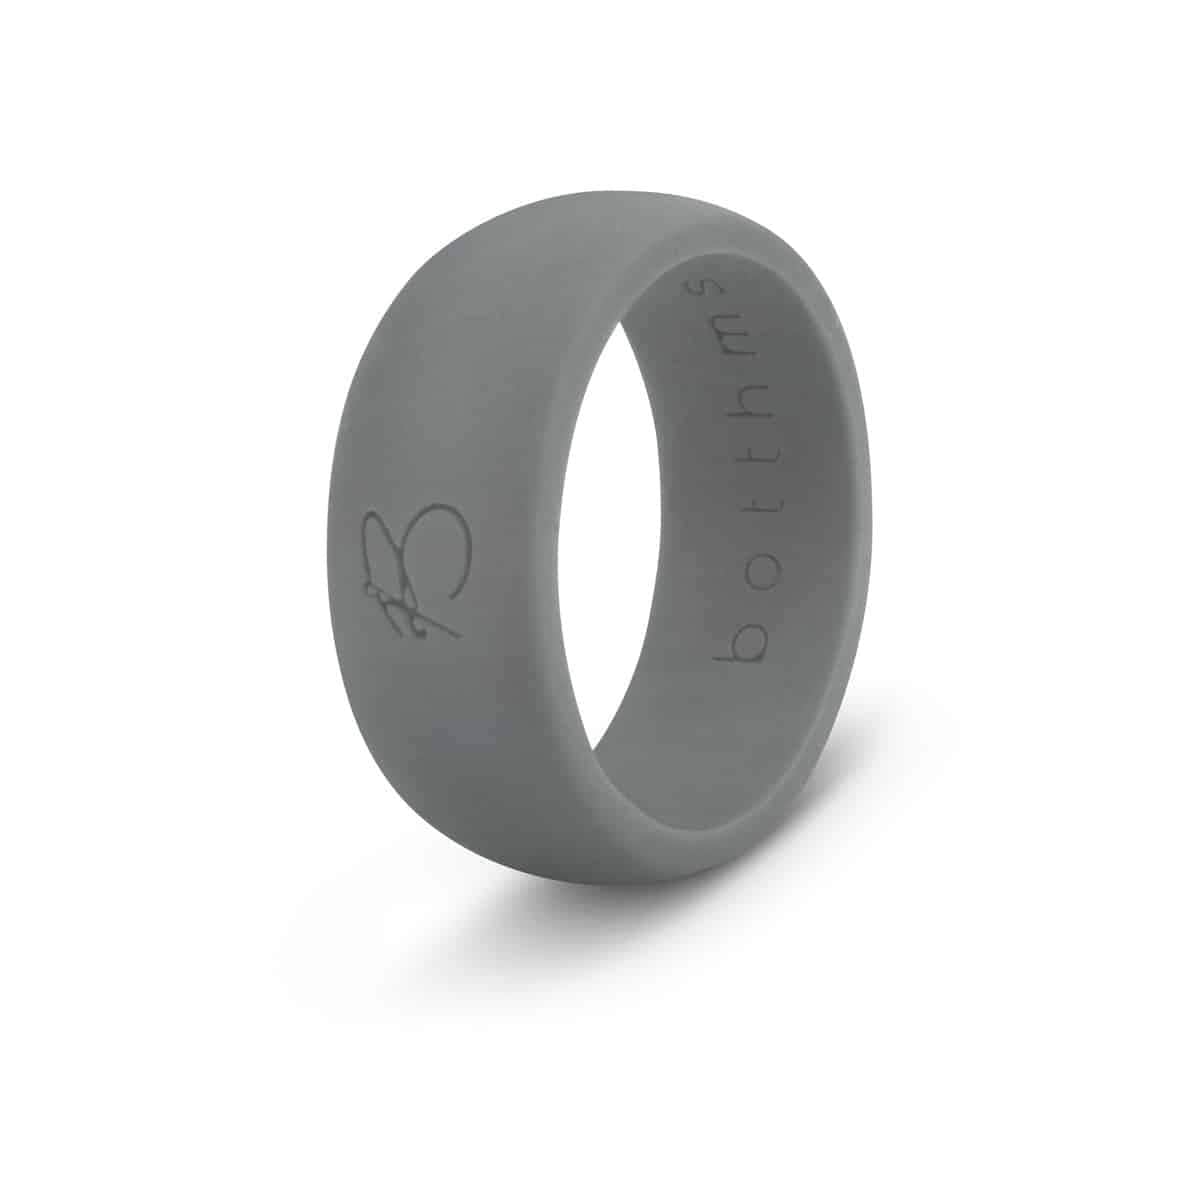 botthms botthms Charcoal Active Silicone Ring Silicone Rings